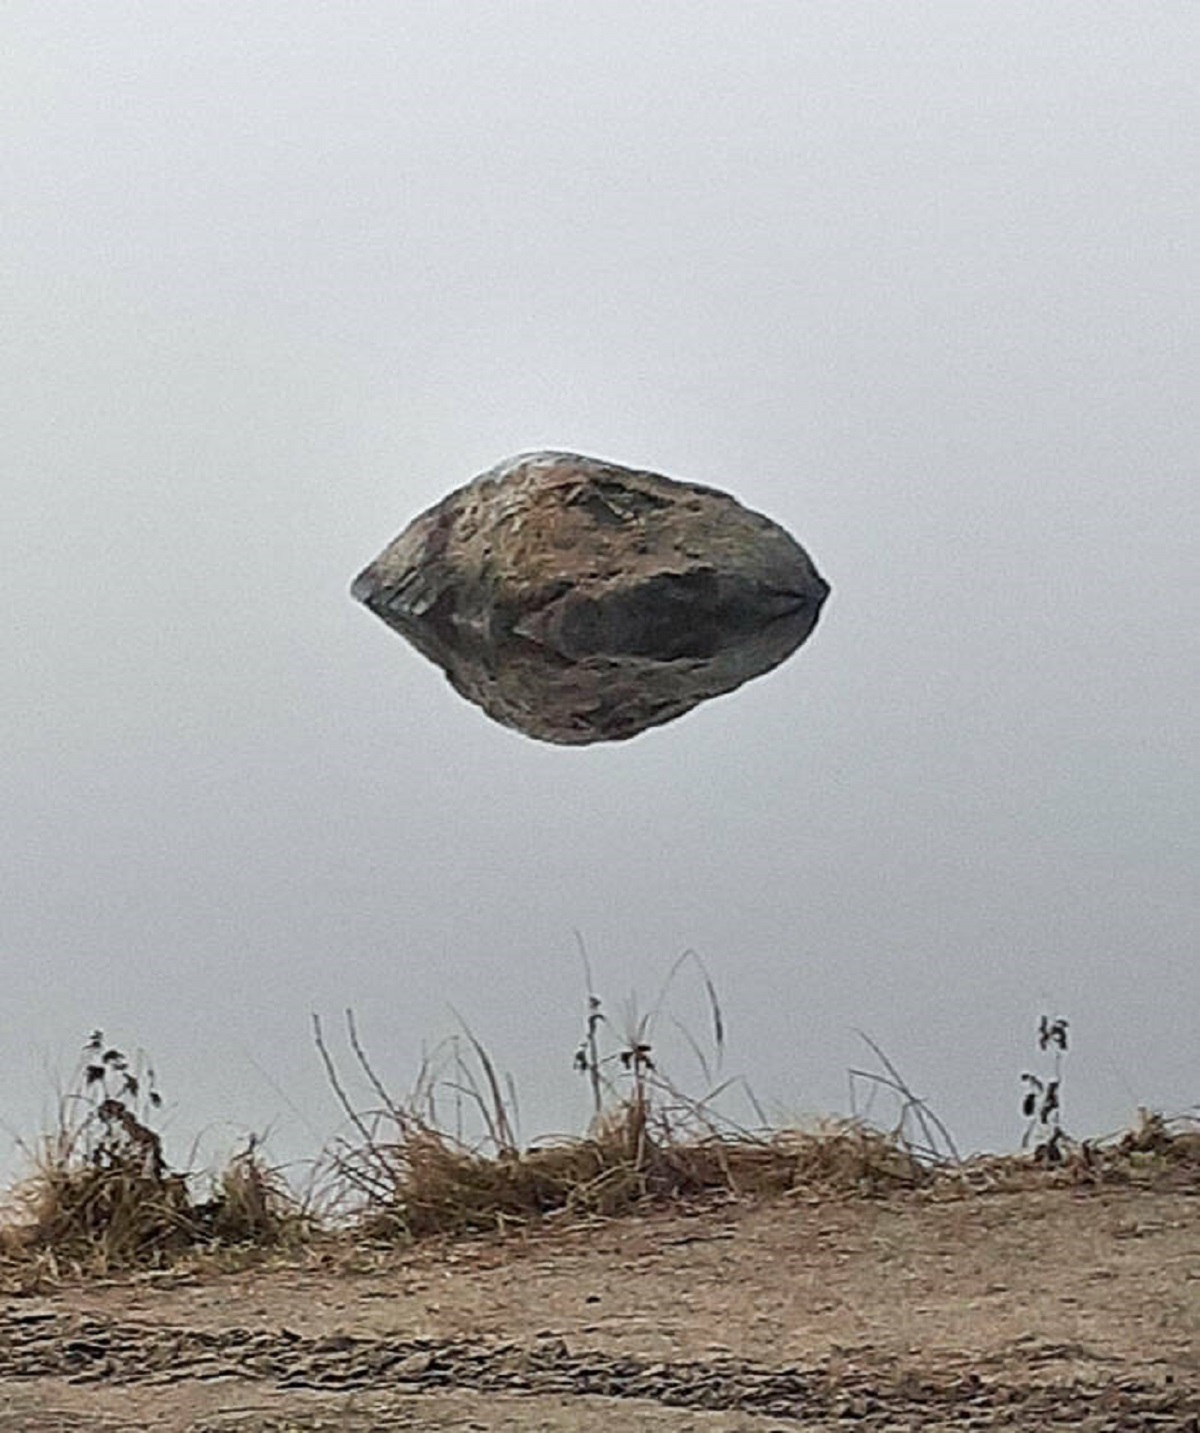 "This Rock Is Just Reflecting In Water That You Can't See Because Of The Fog"